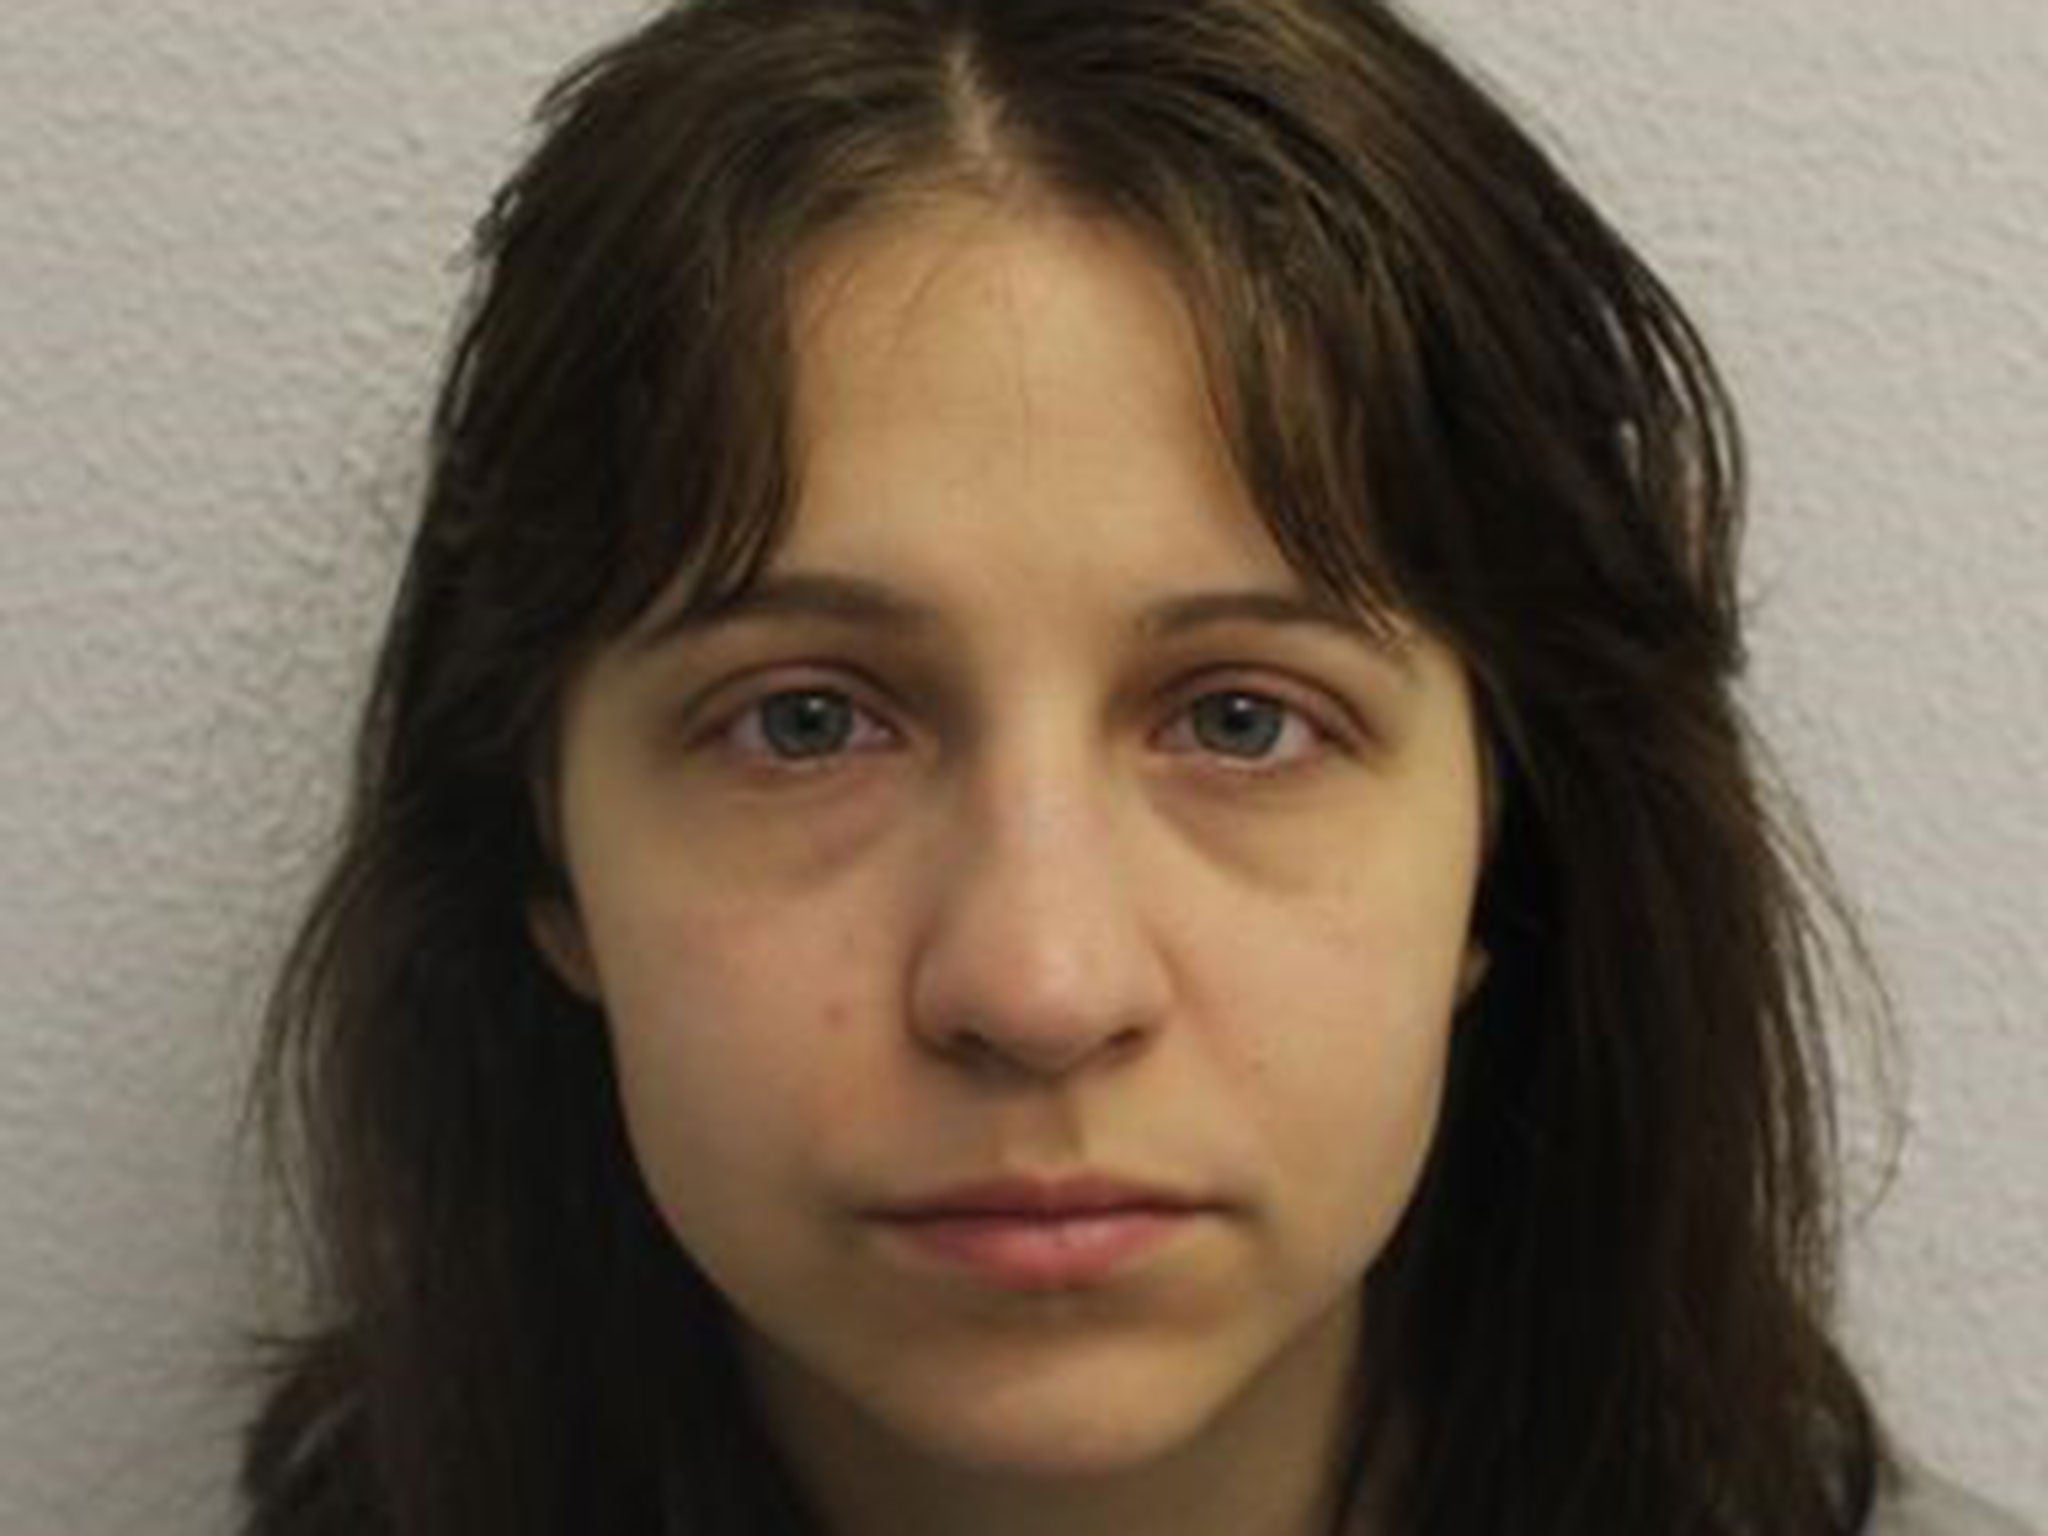 Jessica Nordquist, who faked her own rape and kidnap as part of an elaborate cyber-stalking campaign